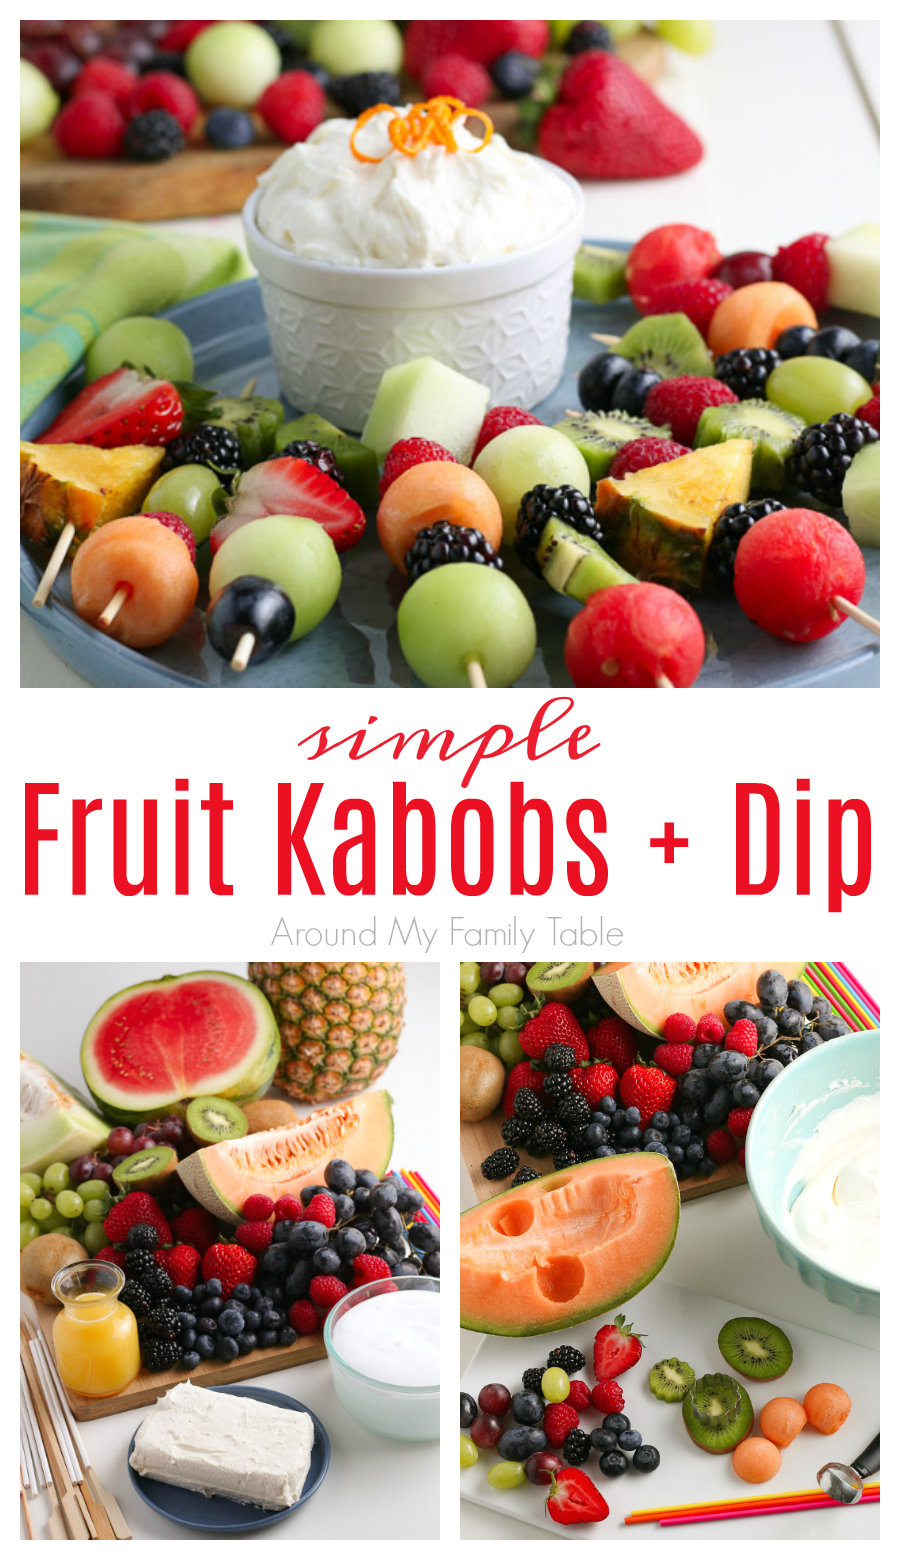 This simple snack of Fruit Kabobs and fruit dip is such a fun and easy summer time (or anytime treat). They are great for snacks, desserts, party appetizers, and more. via @slingmama